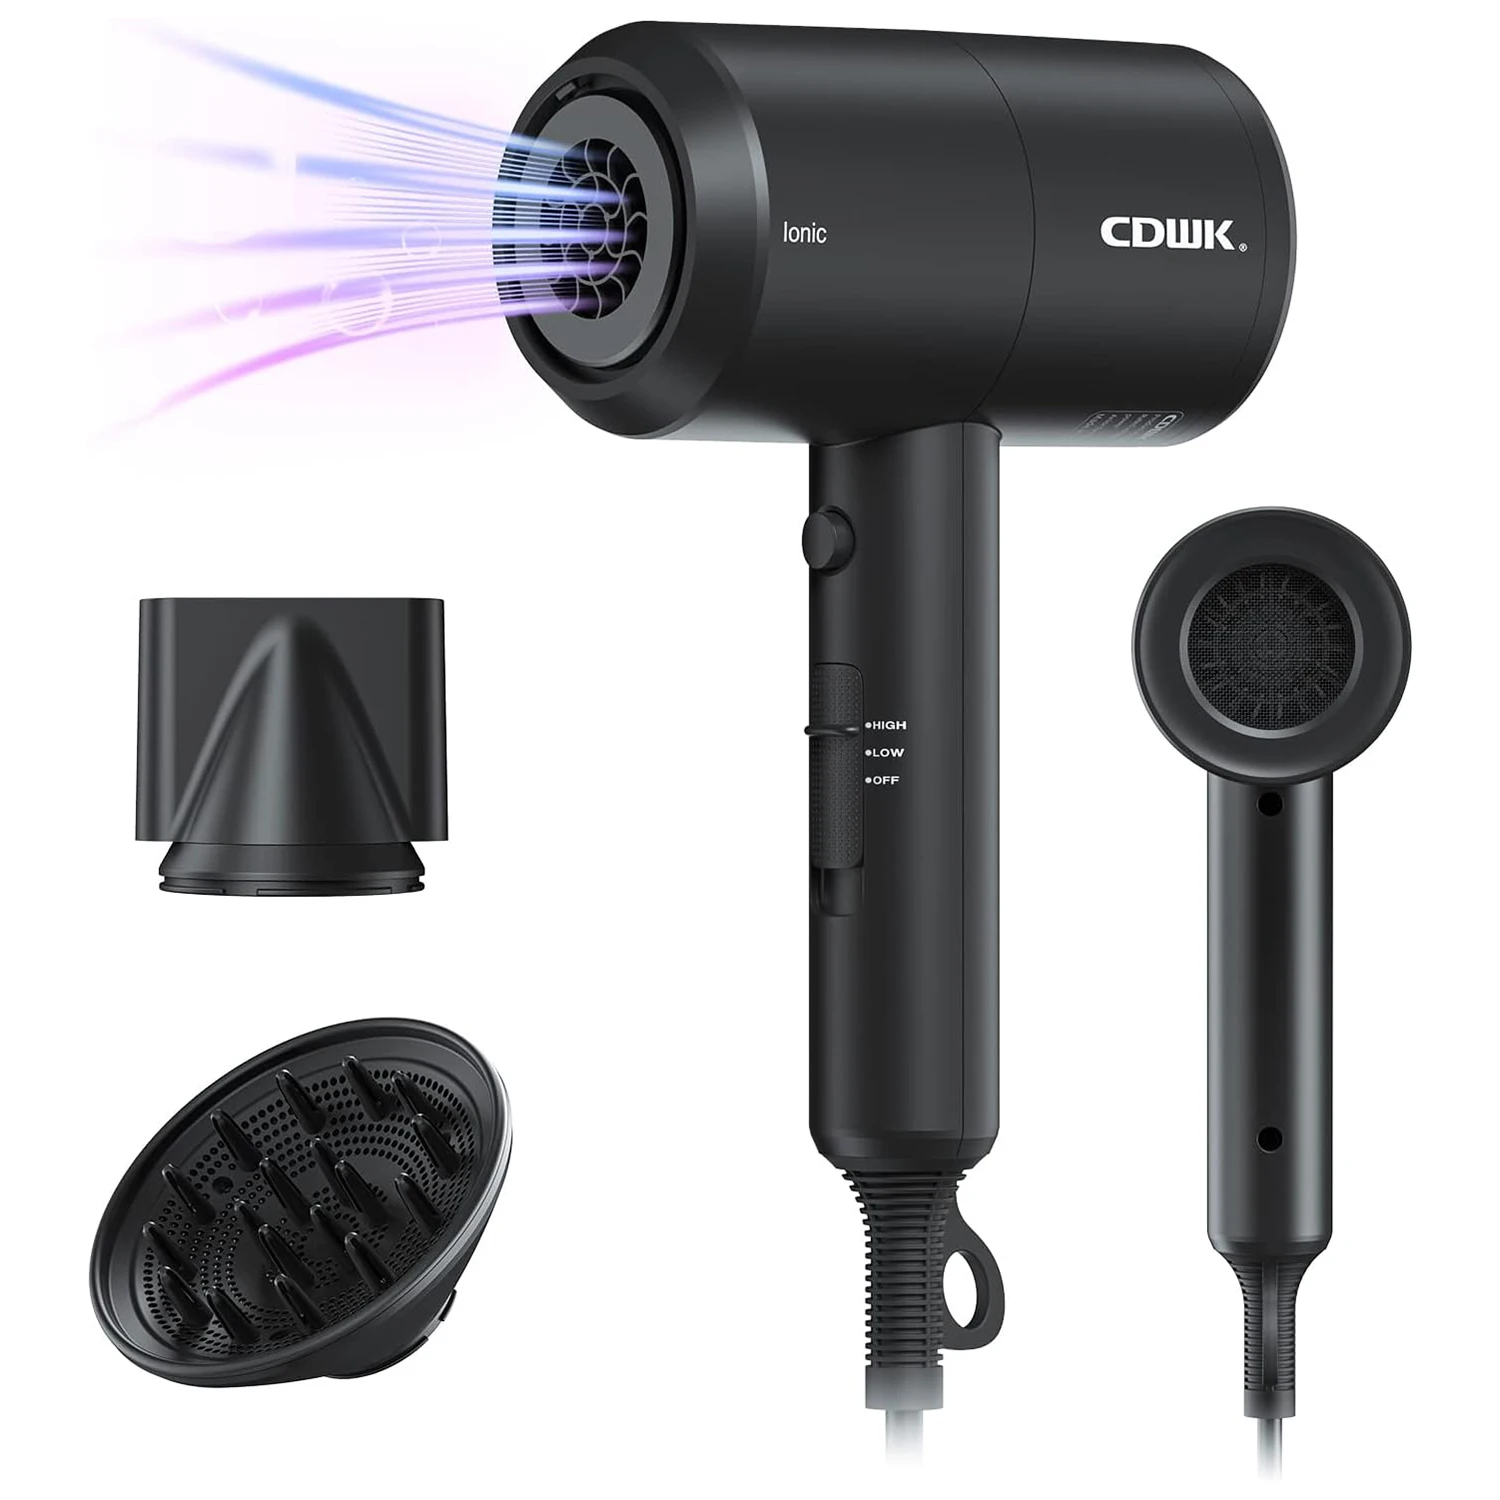 Professional Ionic Negative Hair Dryer with Diffuser 1800W Fast Drying Hair Dryers for Curly Straight Hair Travel Portable xiaomi mijia h500 water ion hair dryer 1800w portable lightweight blow dryer